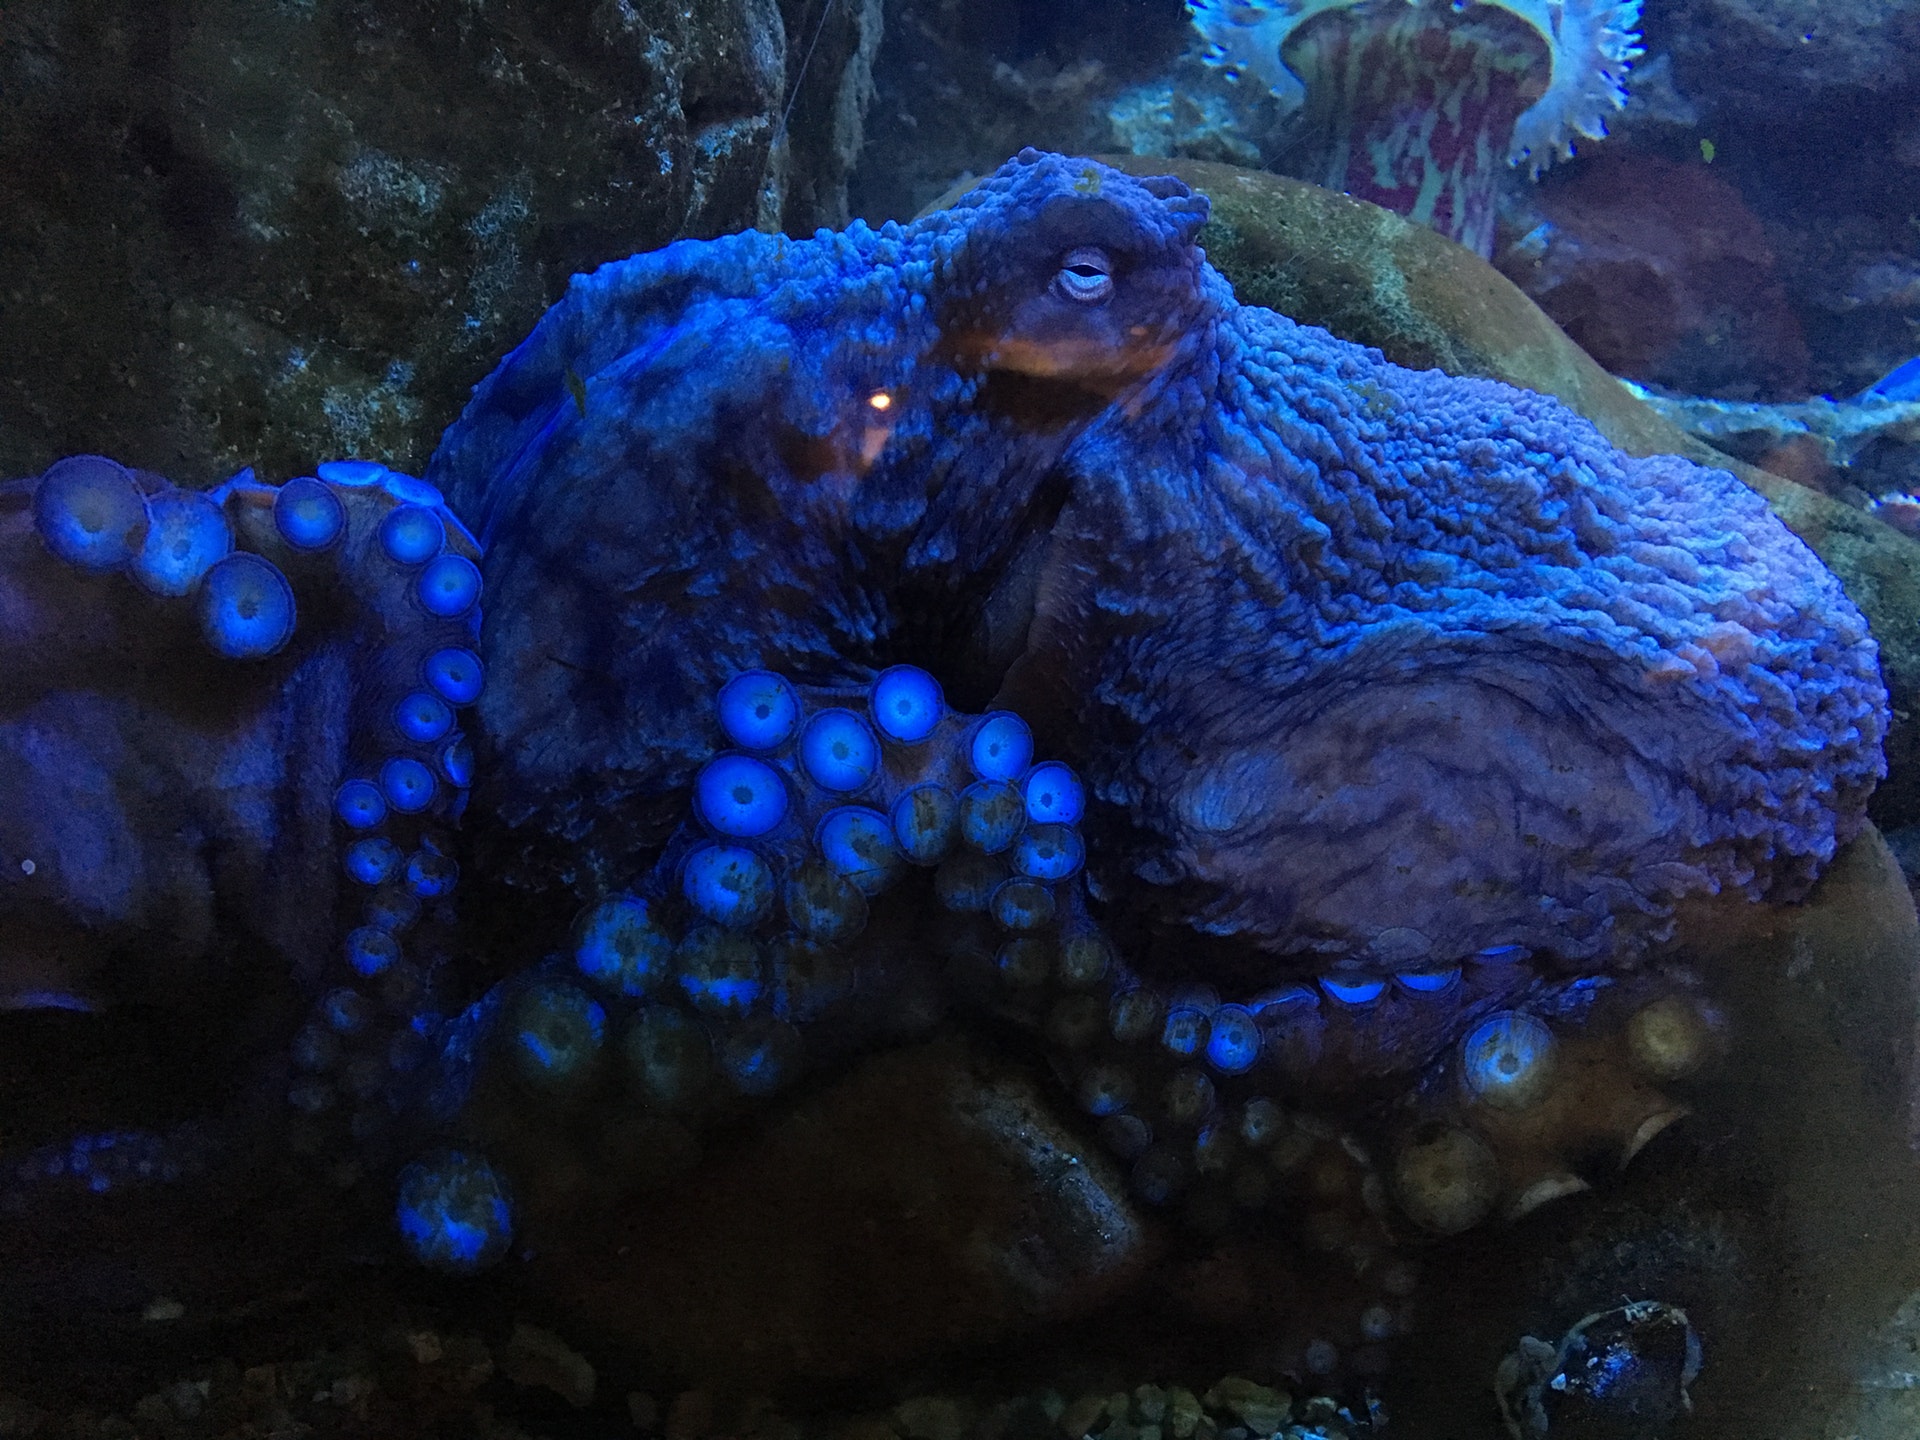 This image shows an octopus change colors